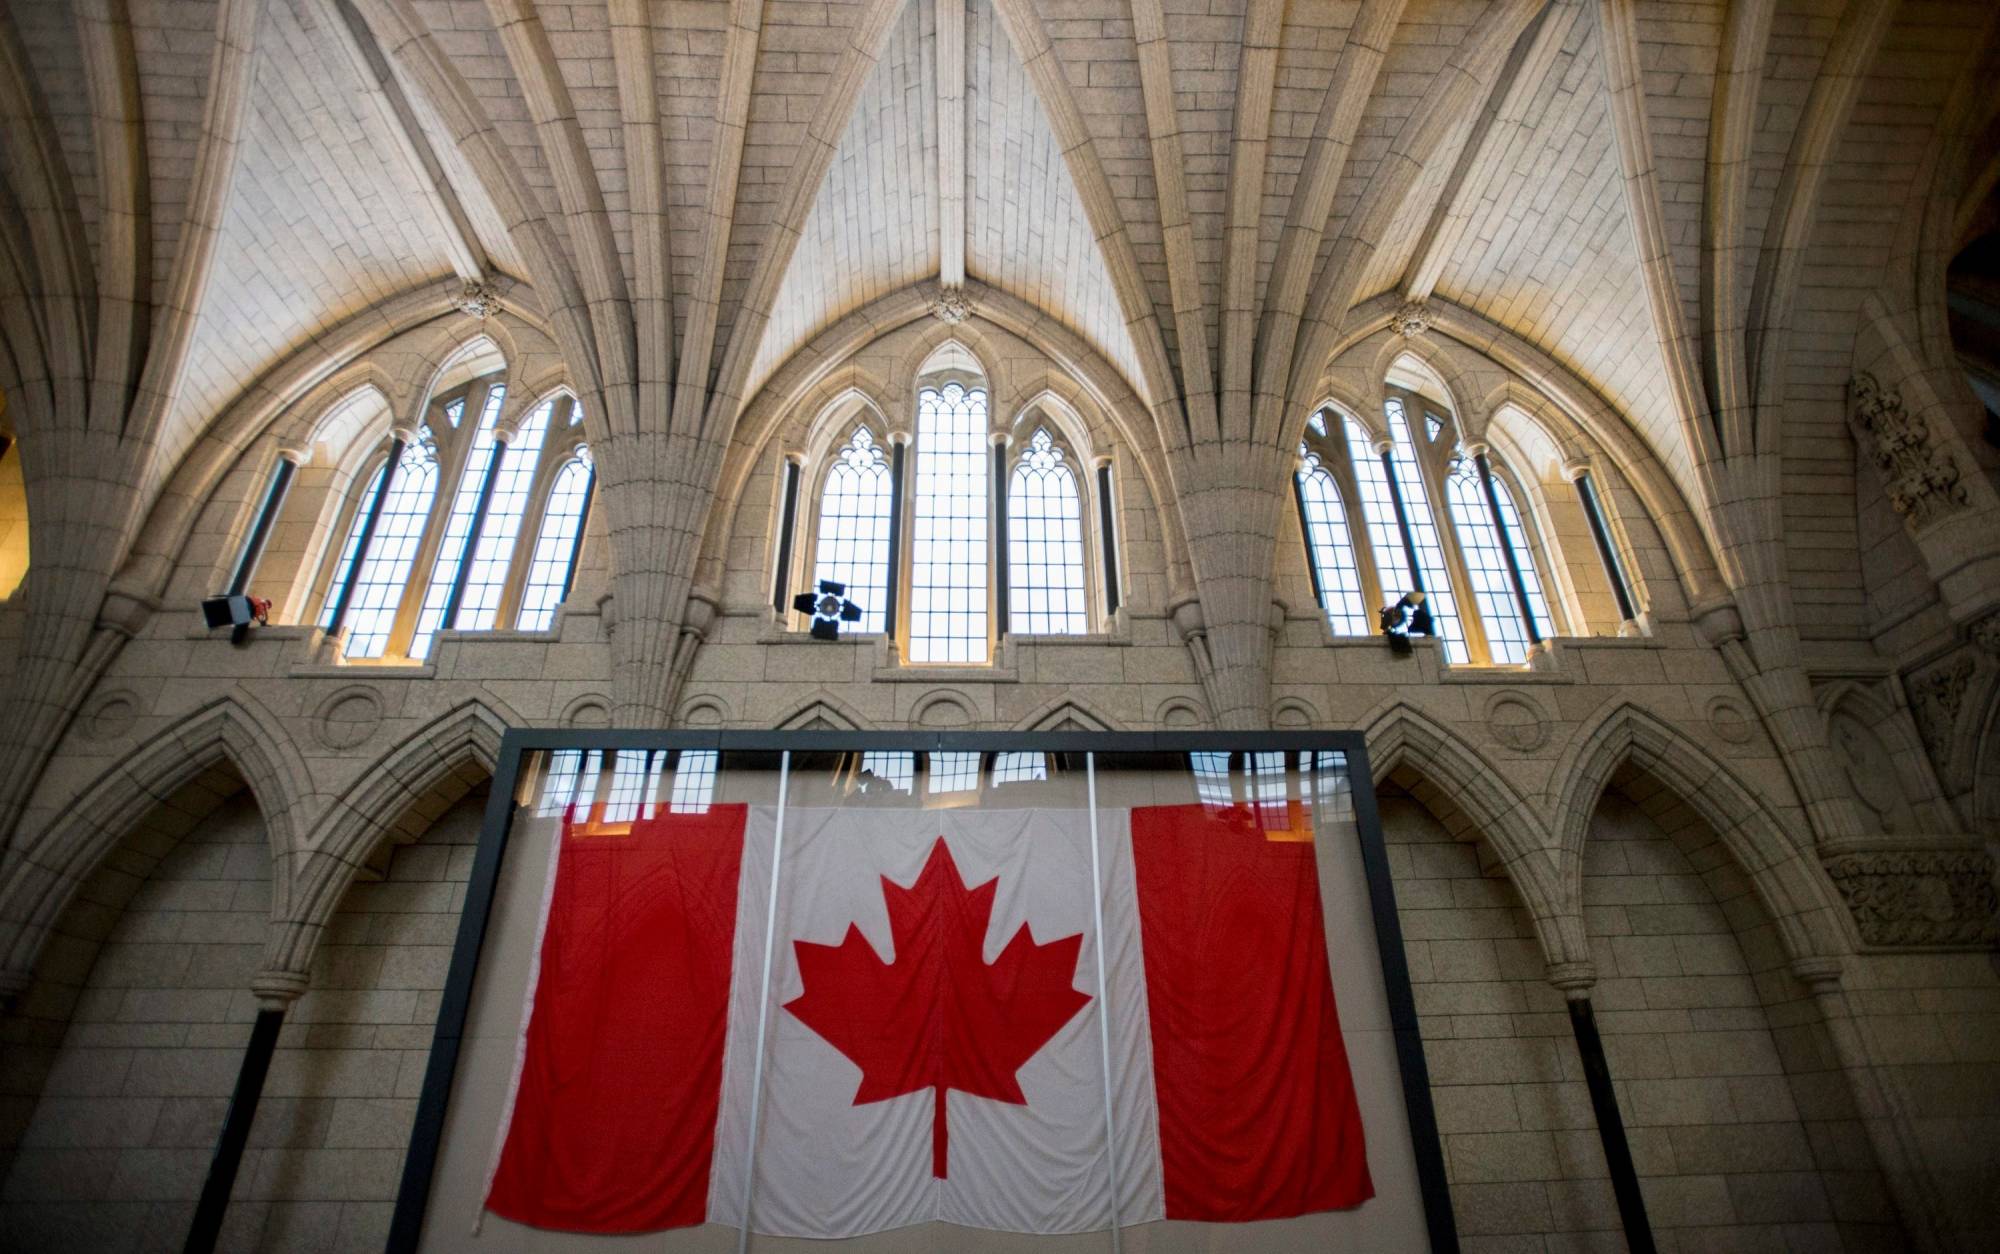 FILE - In this Feb. 14, 2015, file photo, the Maple Leaf flag believed to be the one to be first raised above the Peace Tower on Feb. 15, 1965, following resolution and creation of a distinctive Canadian flag, is seen in a display case in the Hall of Honour on Parliament Hill in Ottawa, Ontario. An online story falsely claims Canadians now can be jailed simply for using an incorrect gender pronoun. The article posted to The Daily Signal website said a law enacted in 2017 would lead to hate crime charges against people who use an incorrect pronoun to describe a transgender person. (Justin Tang/The Canadian Press via AP, File)